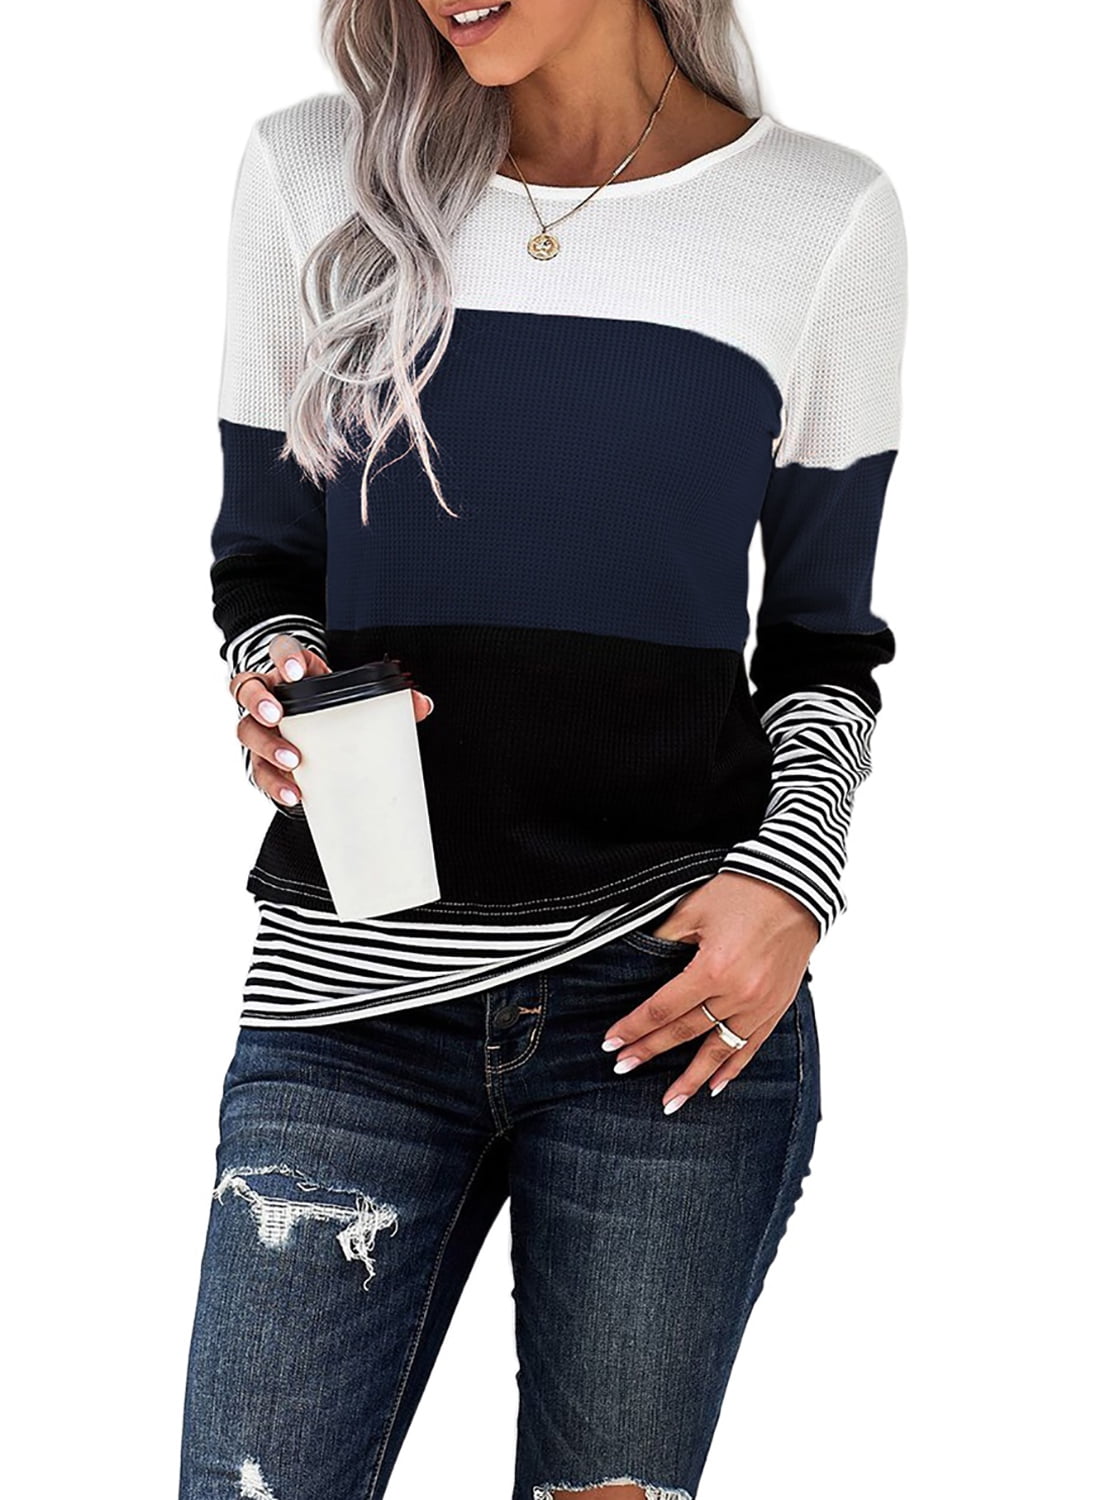 Women Casual Long Sleeve Patchwork Pullover Blouse T-Shirt Crew Neck Sweatshirts 